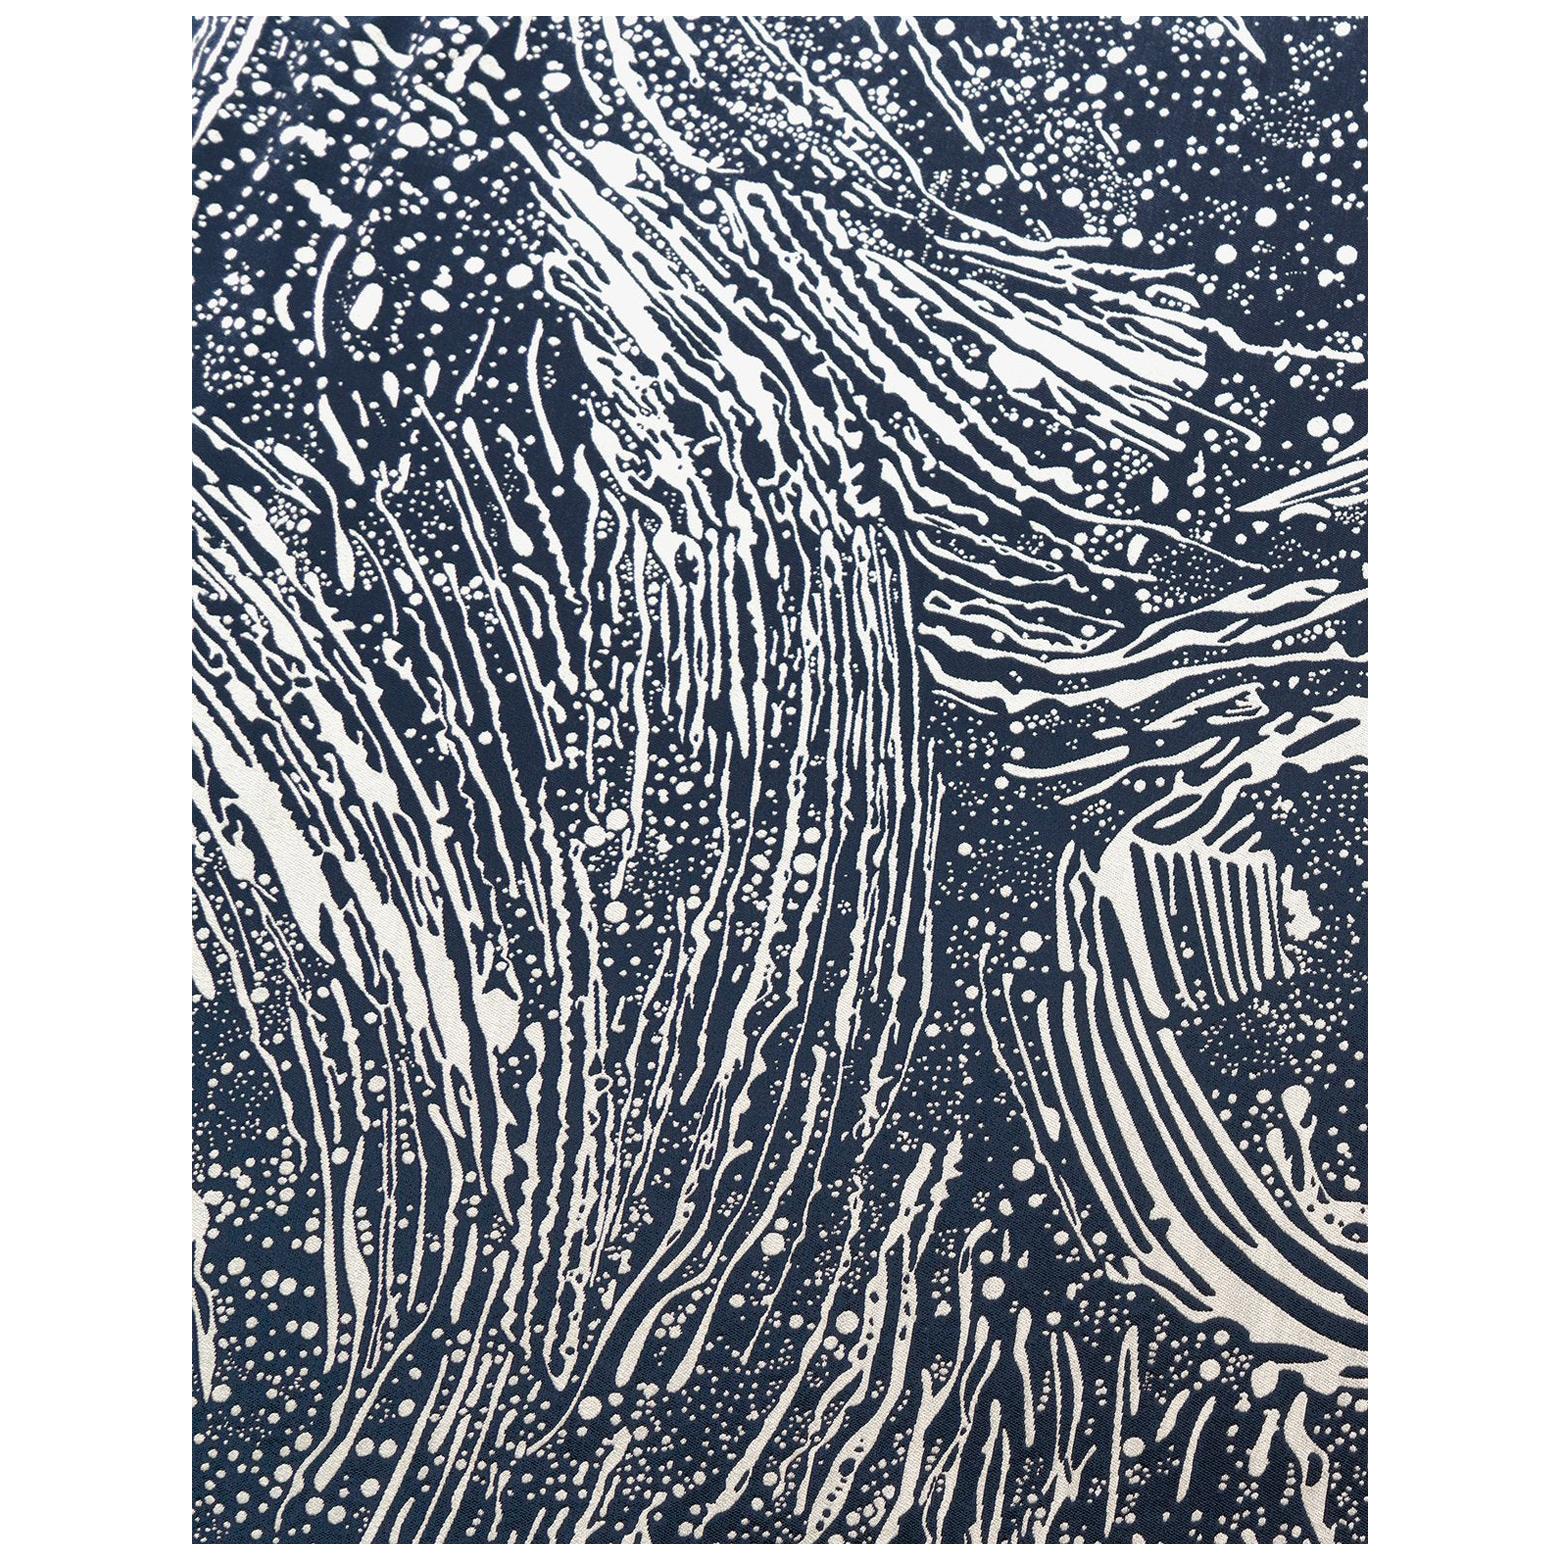 Cosmic Splash Woven Commercial Grade Fabric in Oxford, White and Navy For Sale